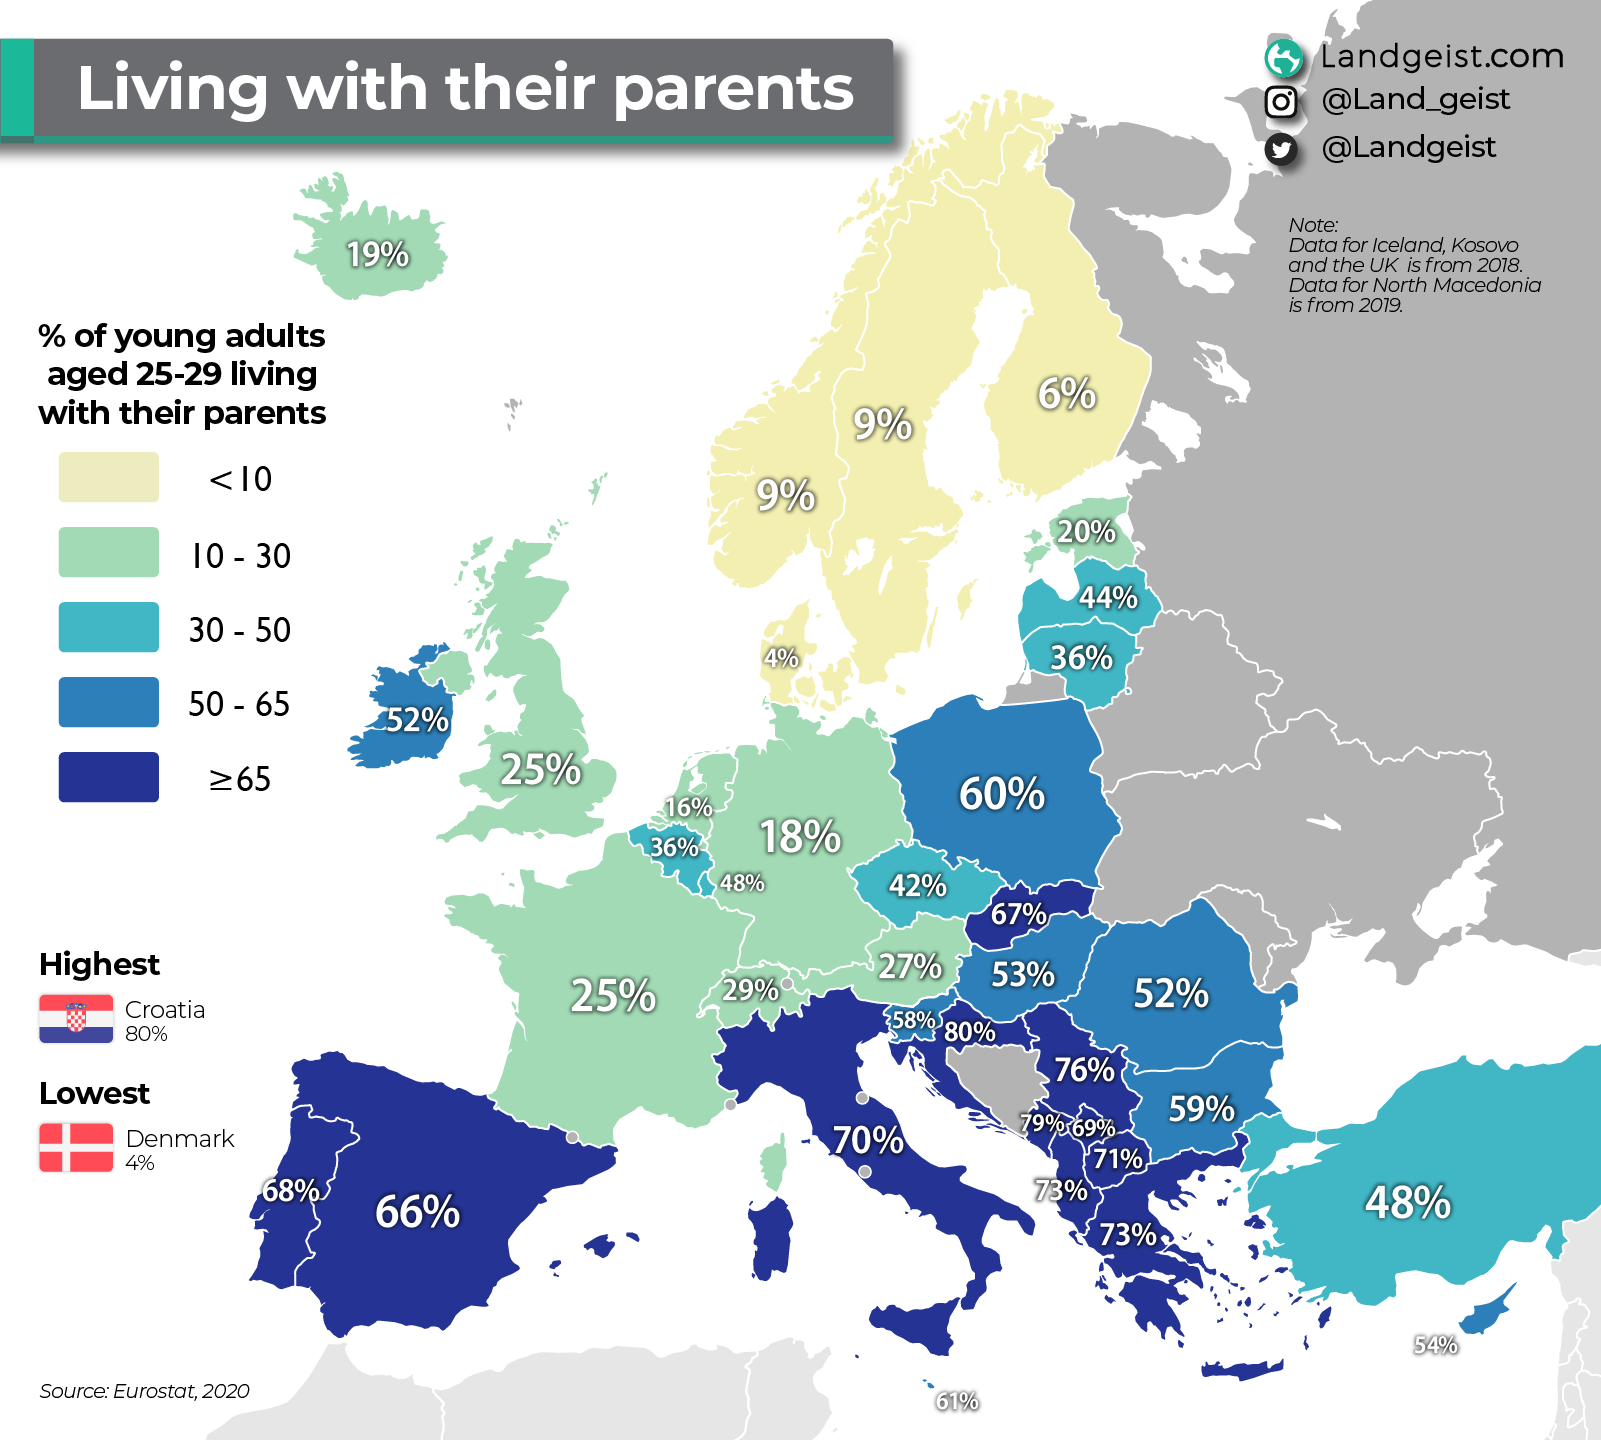 europe-young-adults-living-with-their-parents-25-29.png